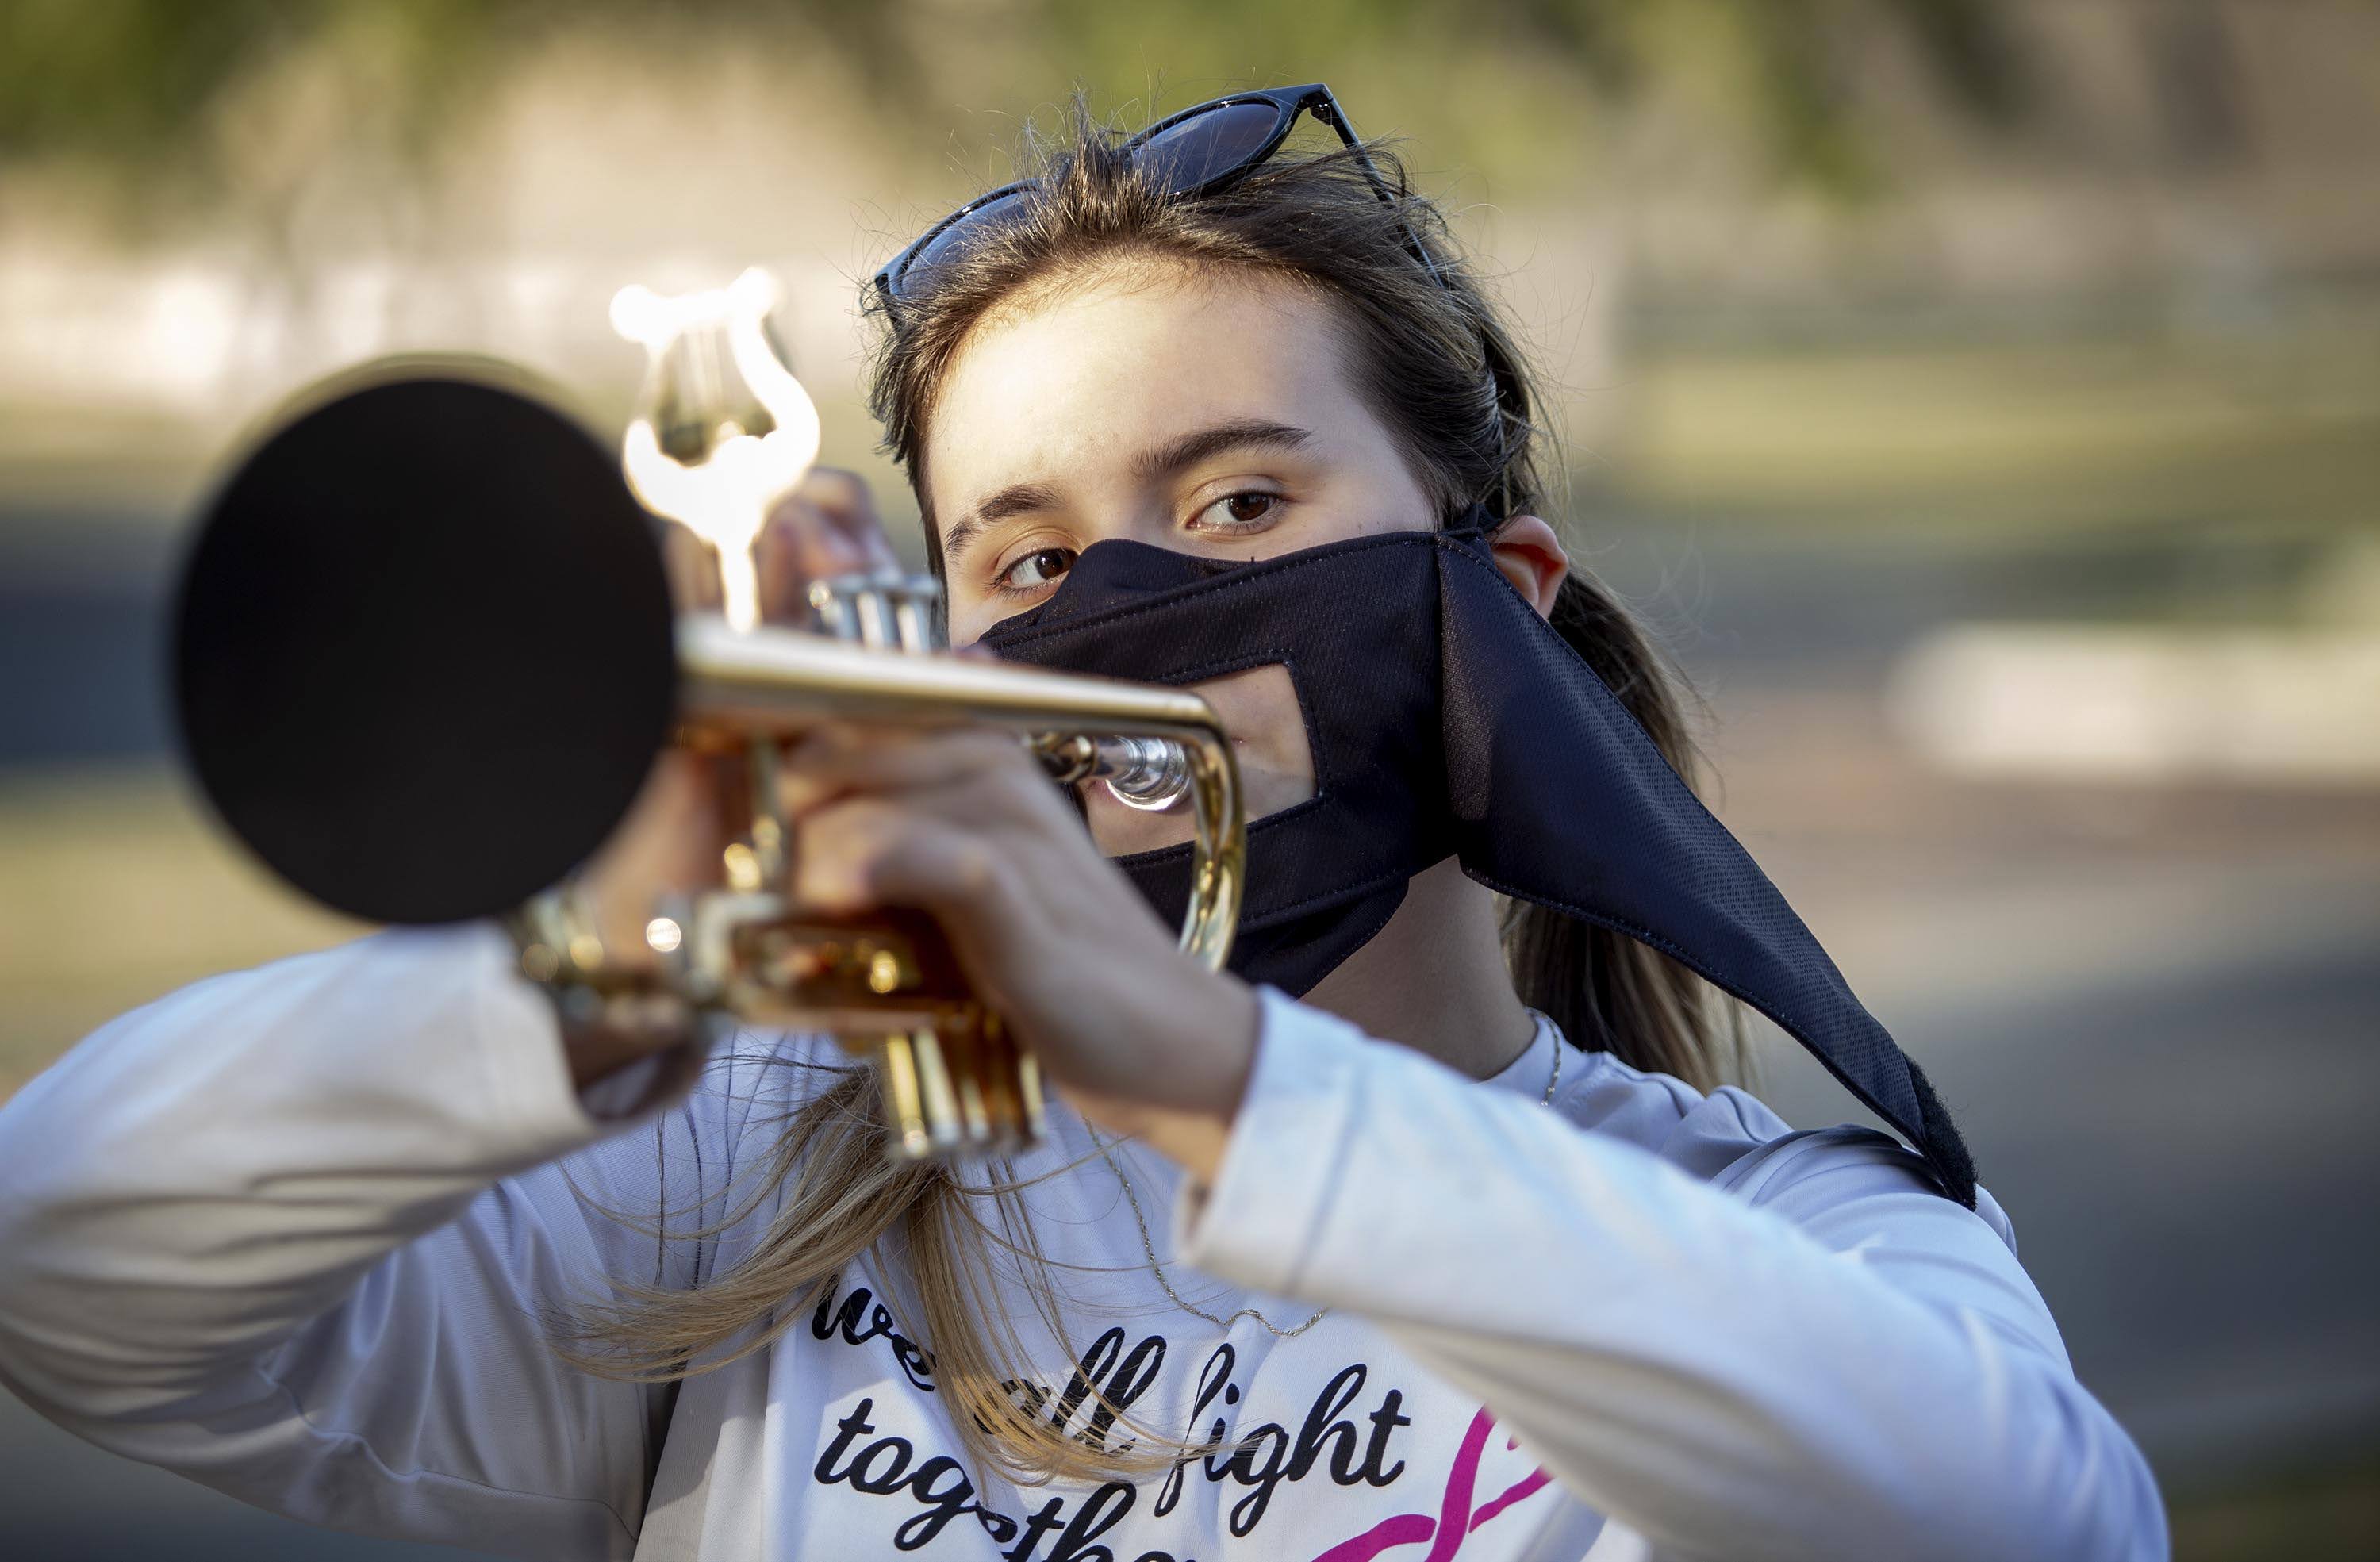 Makenna Calval, who plays for the High School Marching Band, has an adapted mask so she can play, and screen over the end of her trumpet to help prevent the possible spread of COVID-19. (Robin Lubbock/WBUR)